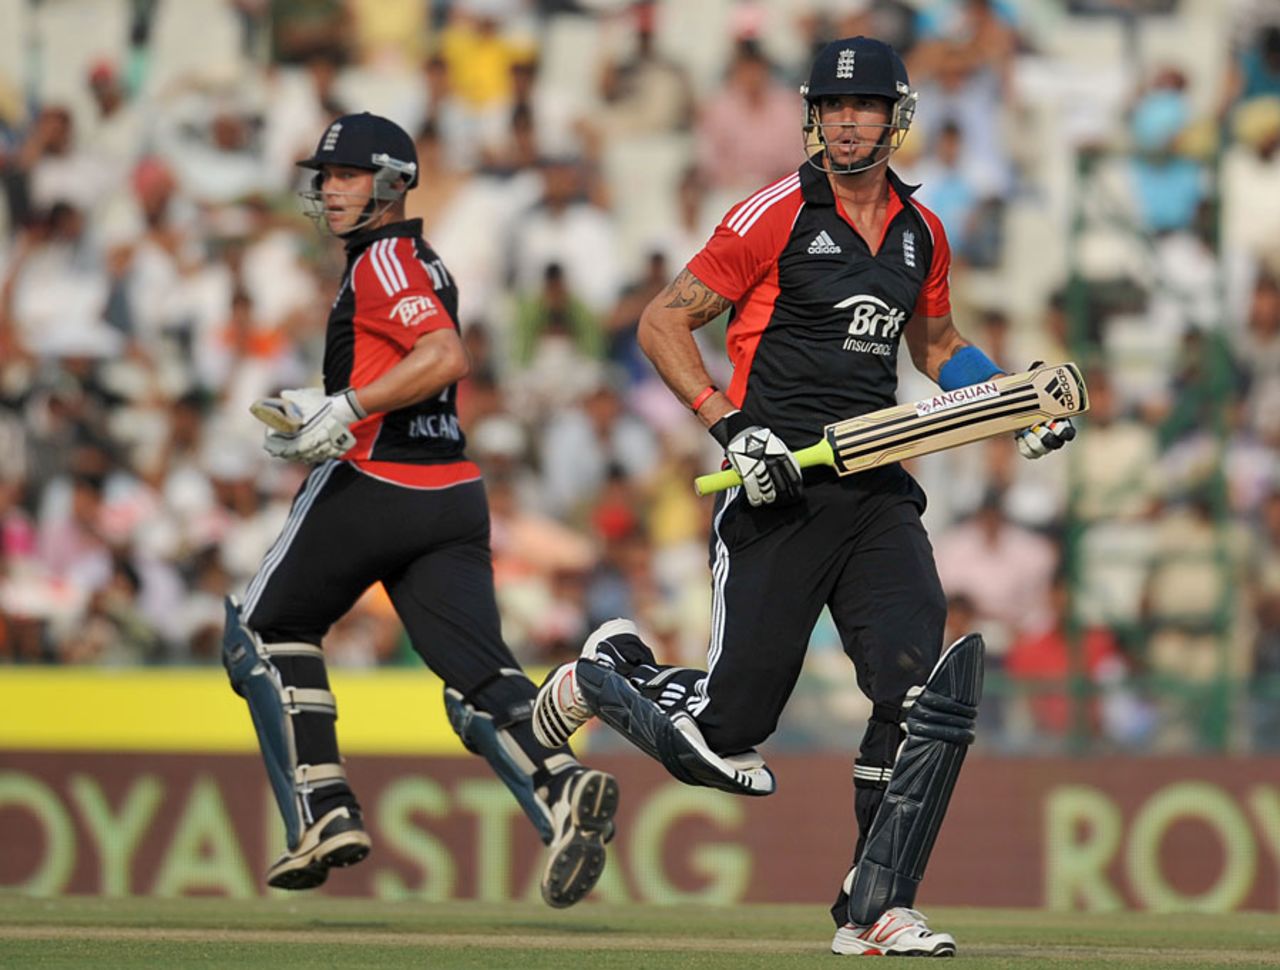 Kevin Pietersen and Jonathan Trott steadied England with a solid third-wicket stand, India v England, 3rd ODI, Mohali, October 20, 2011